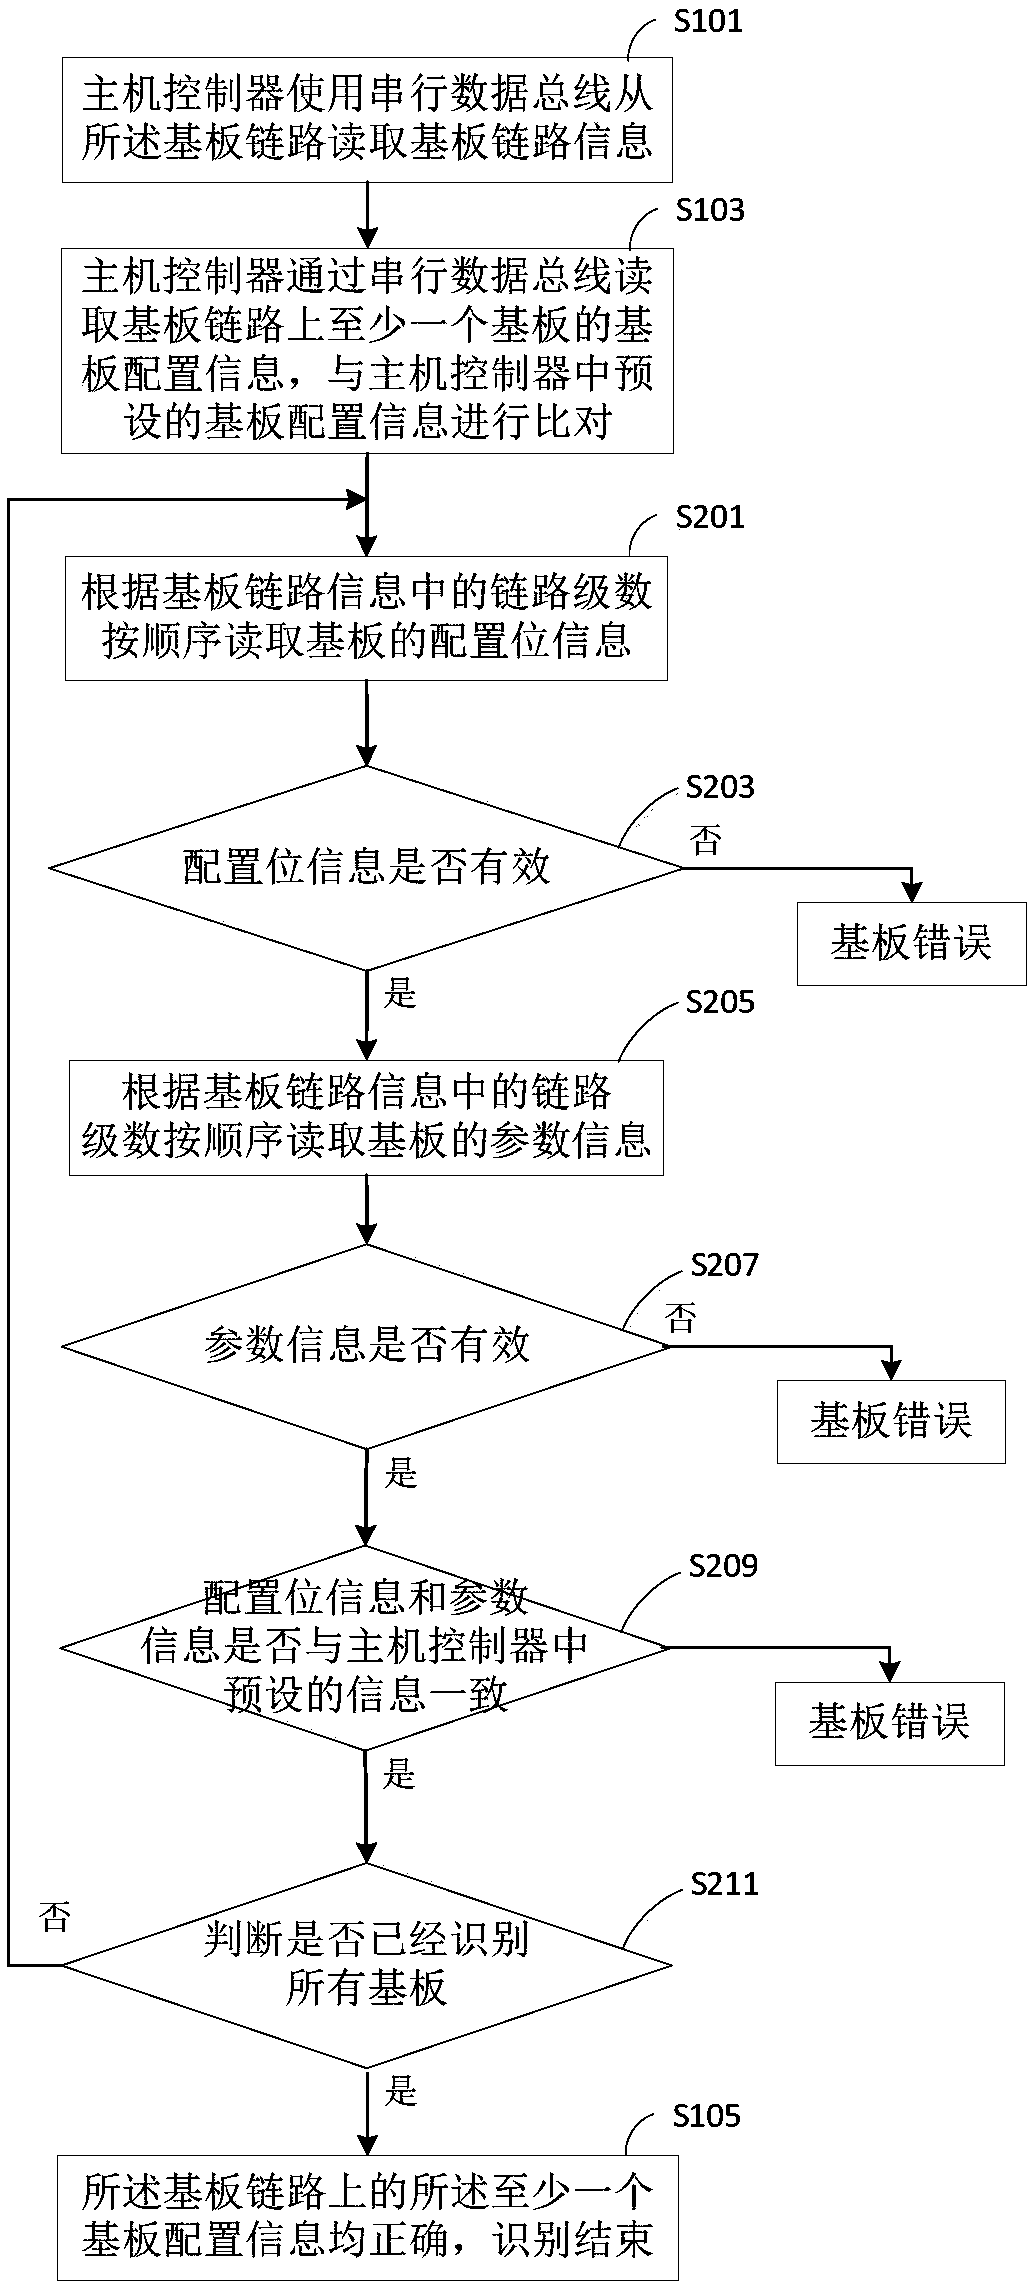 OLED substrate recognition system and method